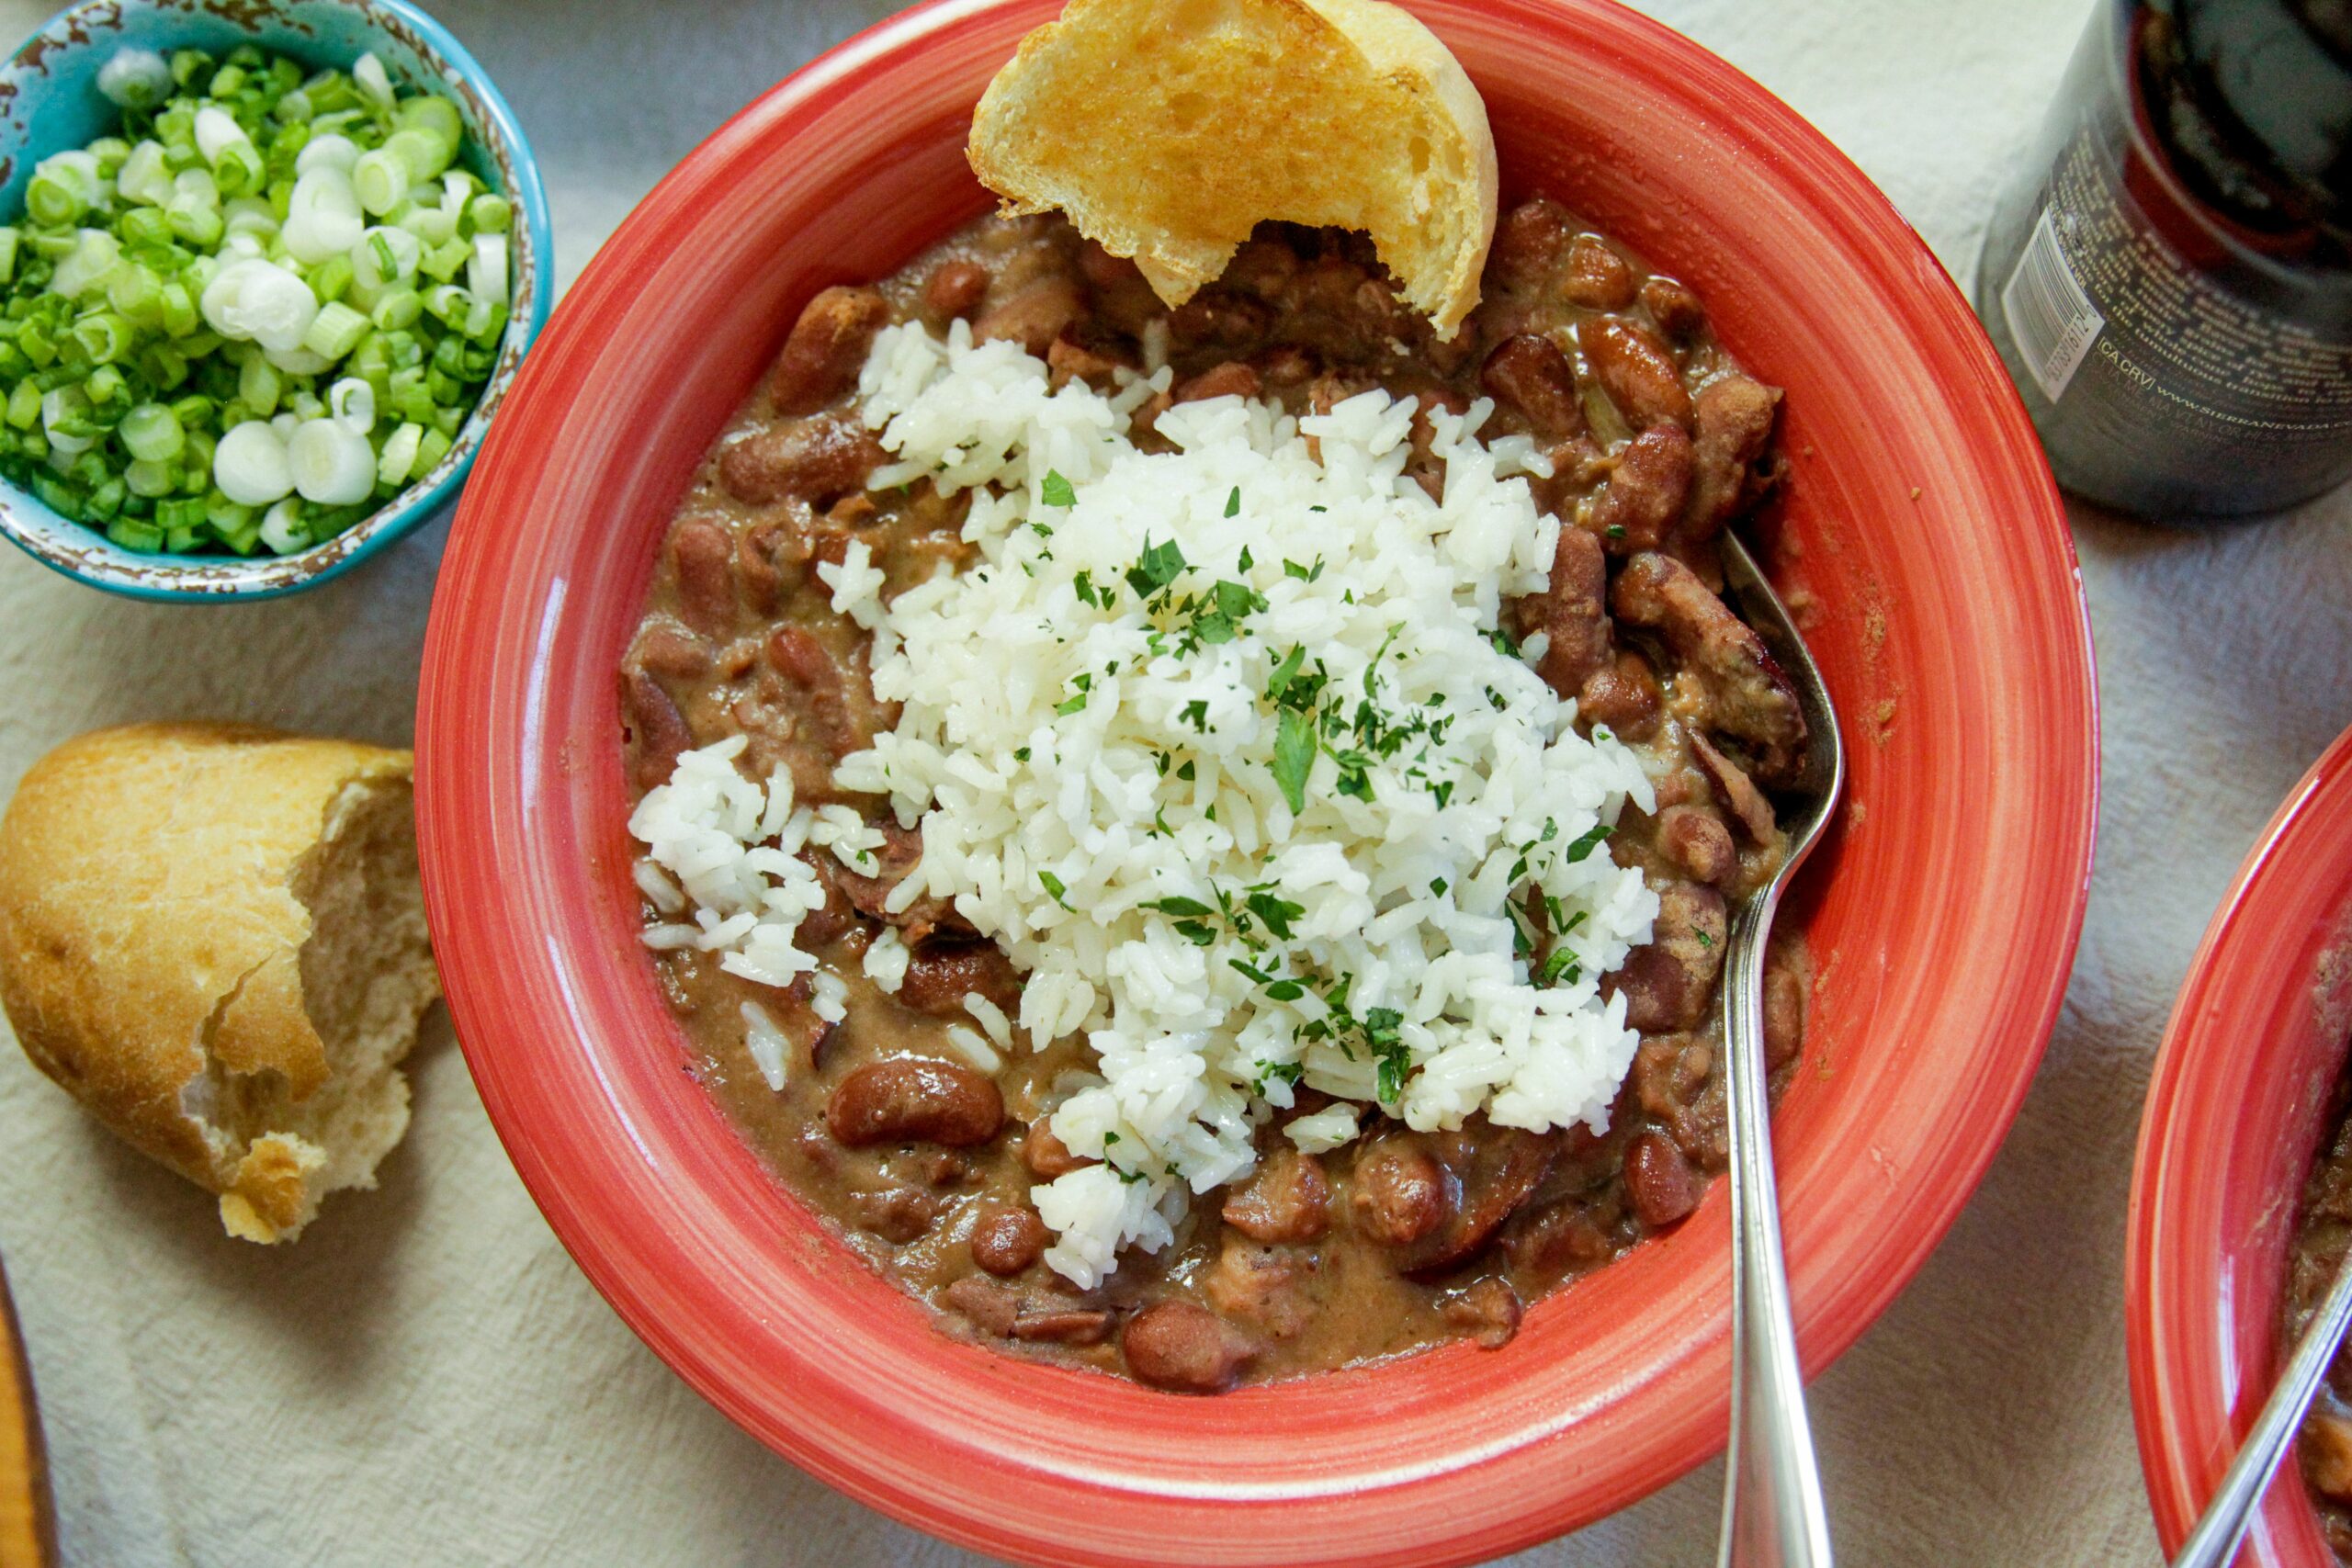 https://www.camelliabrand.com/static/wp-content/uploads/2015/05/Camellia_Brand_red_beans_rice_slow_cooker-scaled.jpeg